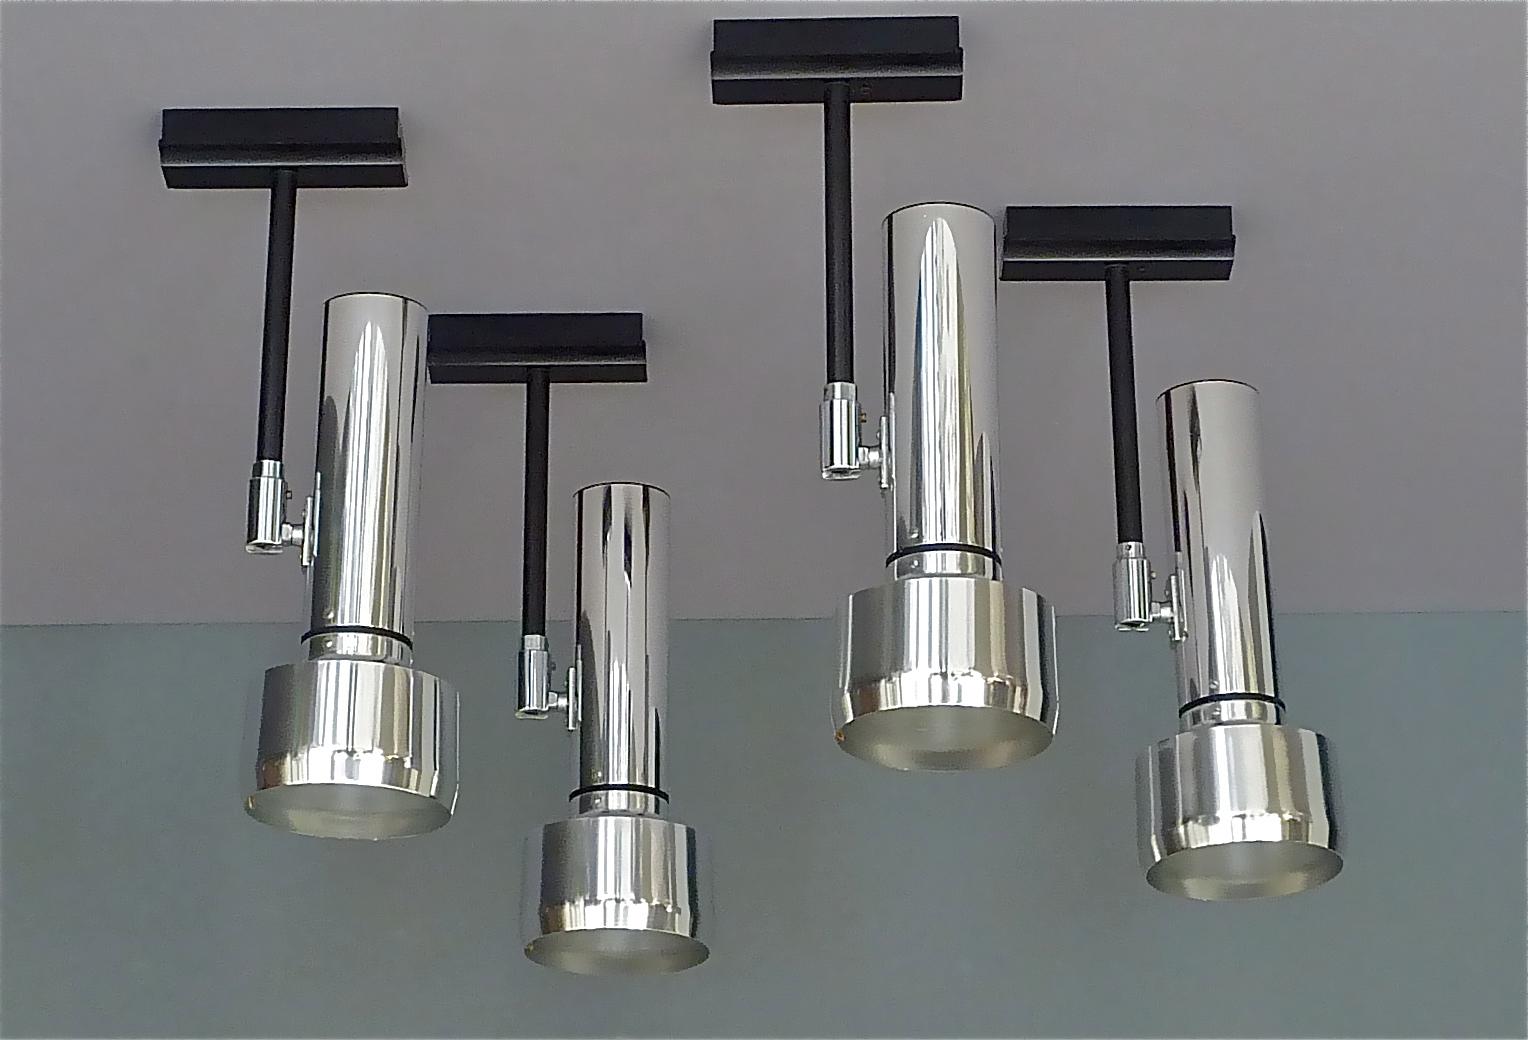 Space Age 4 Wall Lights Erco Spots Ceiling Lamps Chrome Black Sarfatti Arteluce Style For Sale